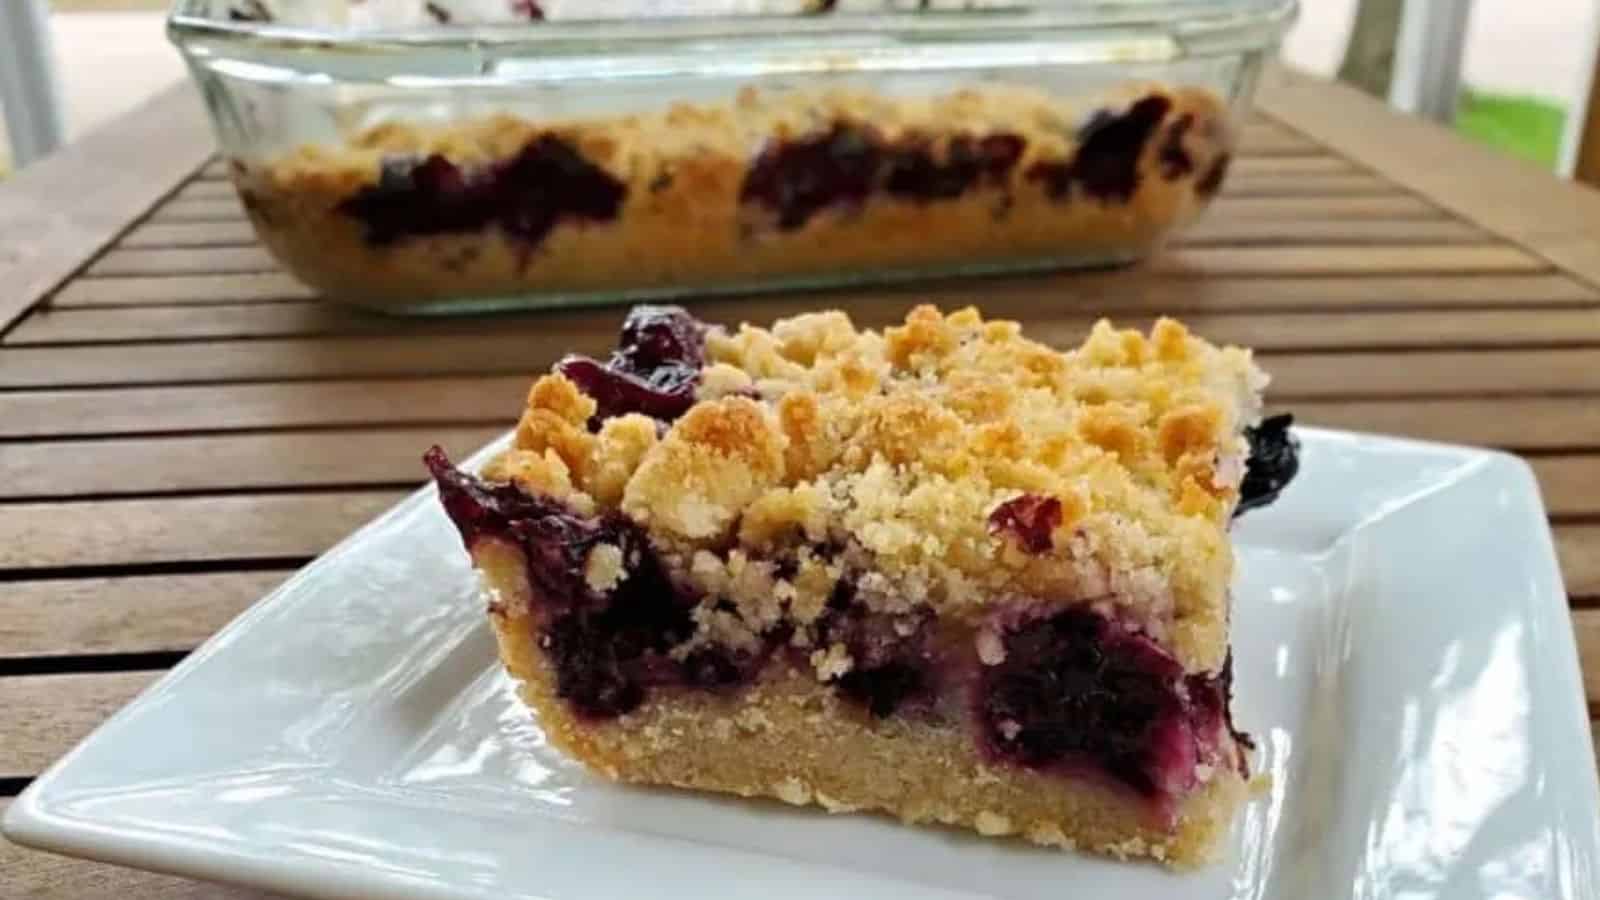 Image shows a Blueberry Crumb Bar on a plate with the full container behind it.